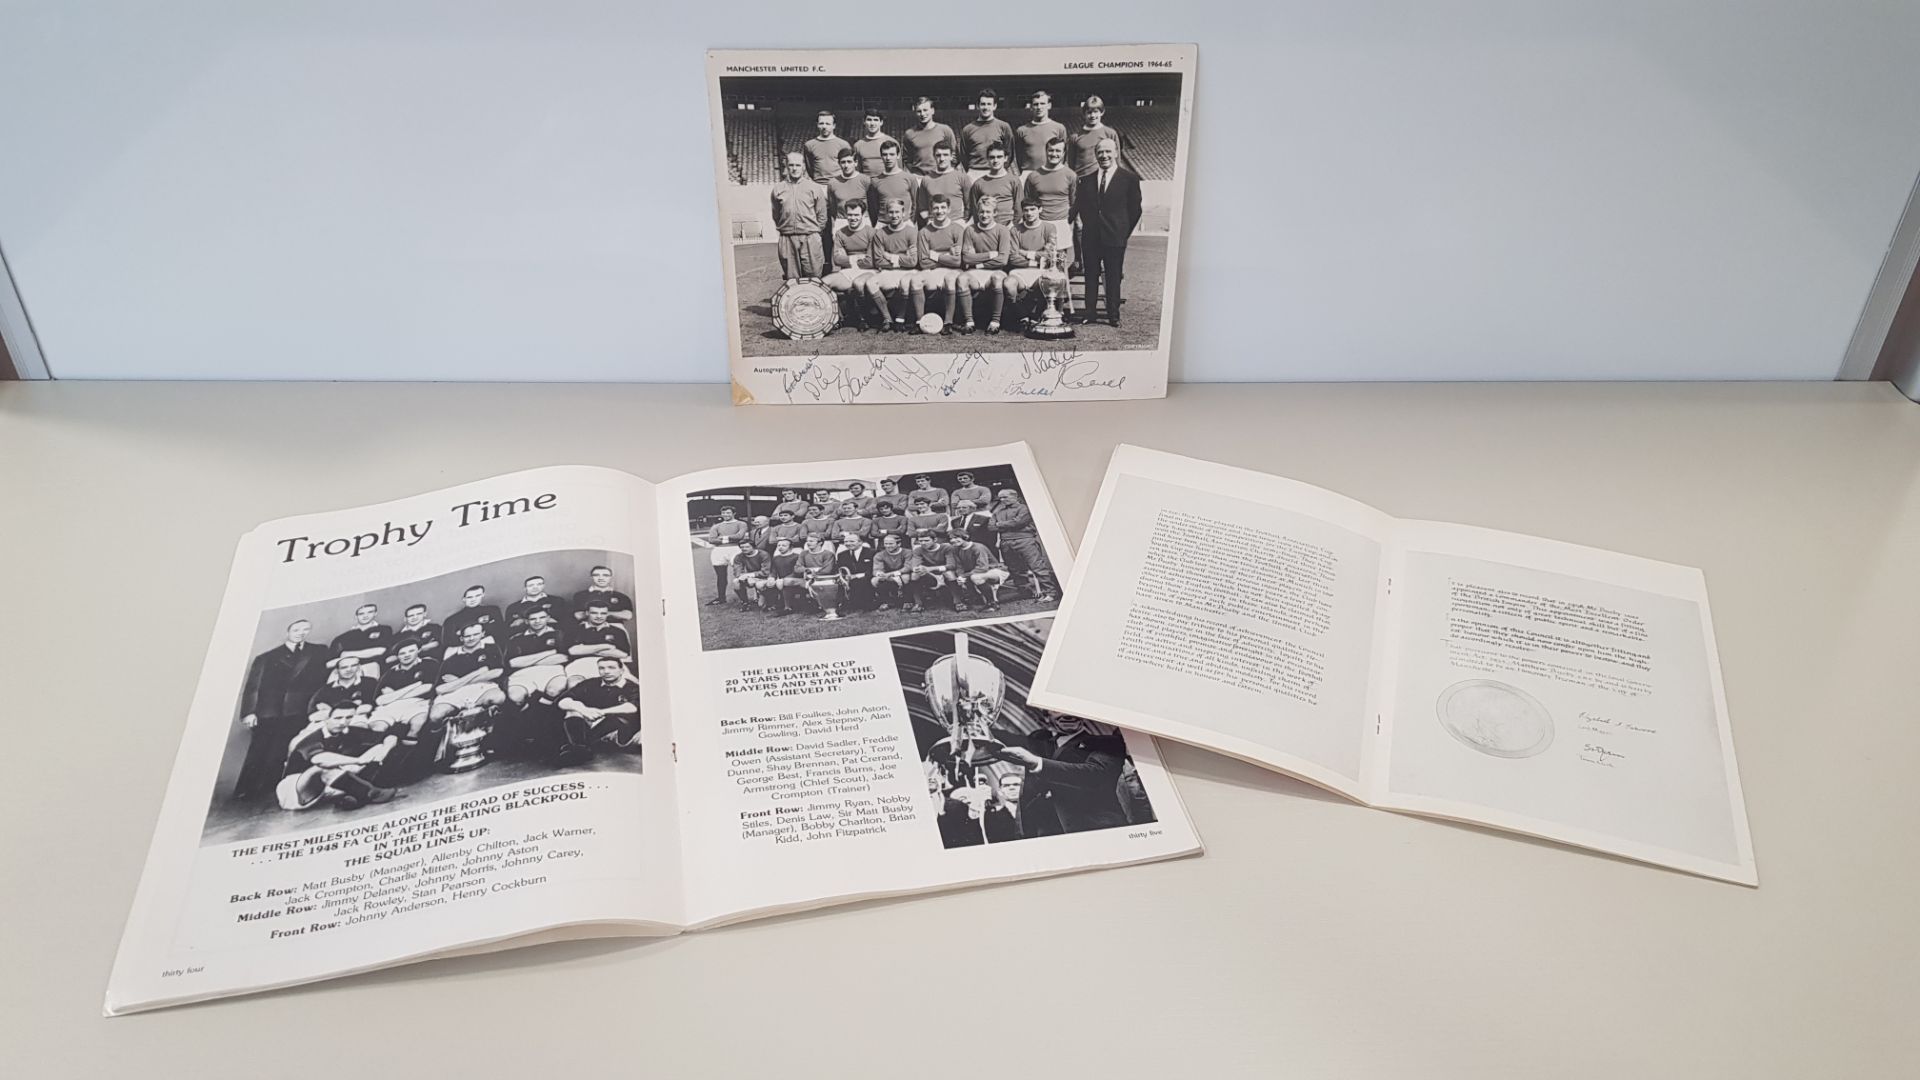 3 X PIECES OF RARE MANCHESTER UNITED MEMORABILIA TO INCLUDE - A PHOTOGRAPH OF THE MANCHESTER - Image 2 of 2